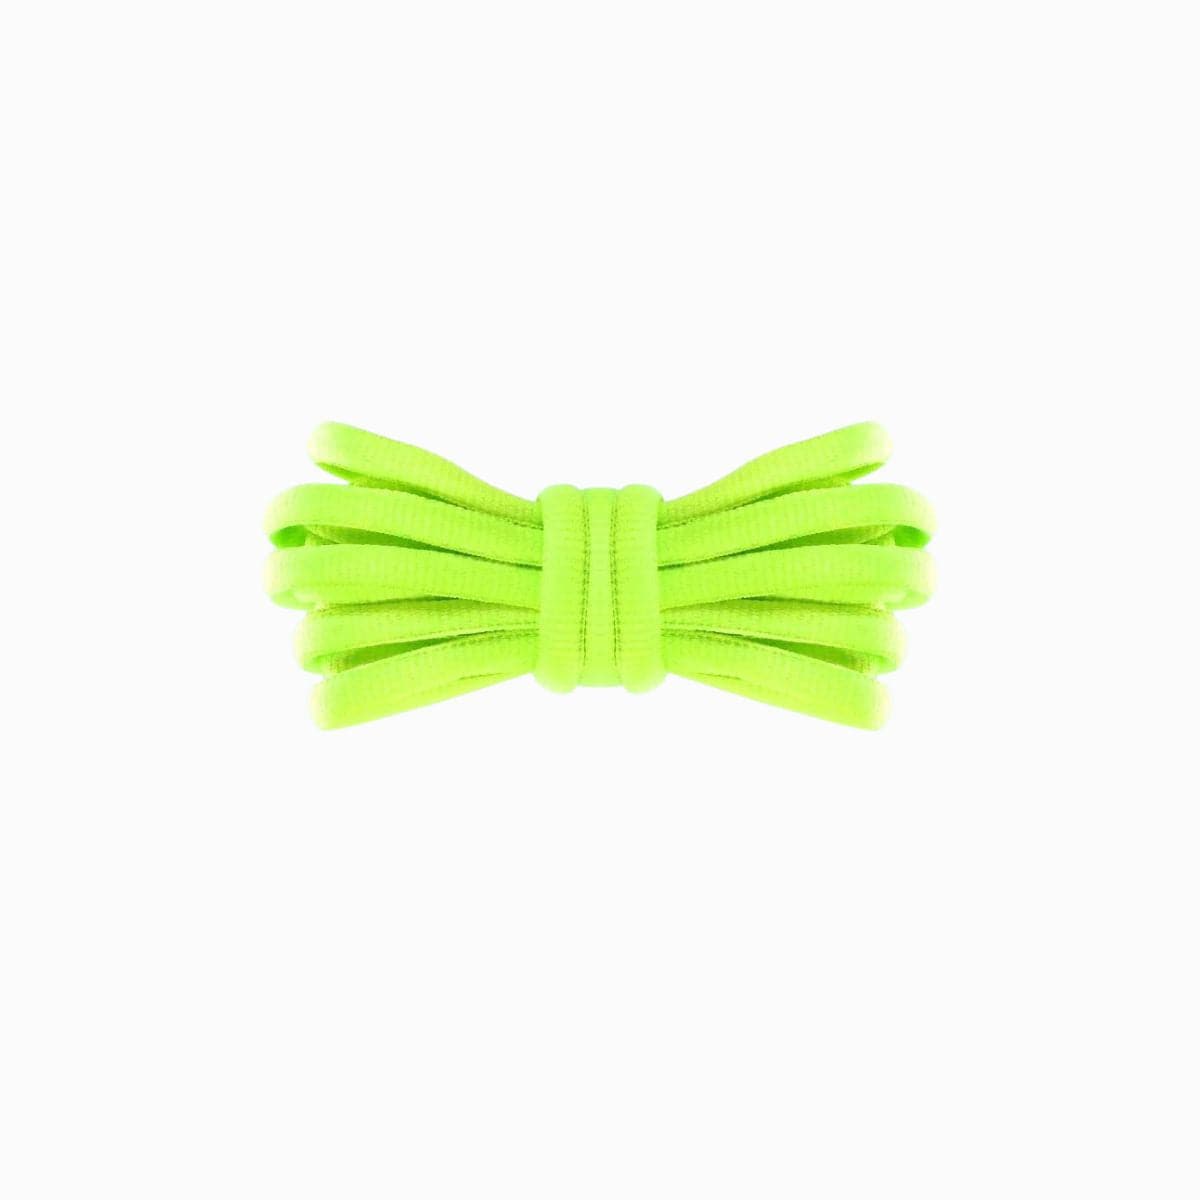 Fluorescent Yellow Replacement Adidas Shoe Laces for Adidas Spezial Sneakers by Kicks Shoelaces